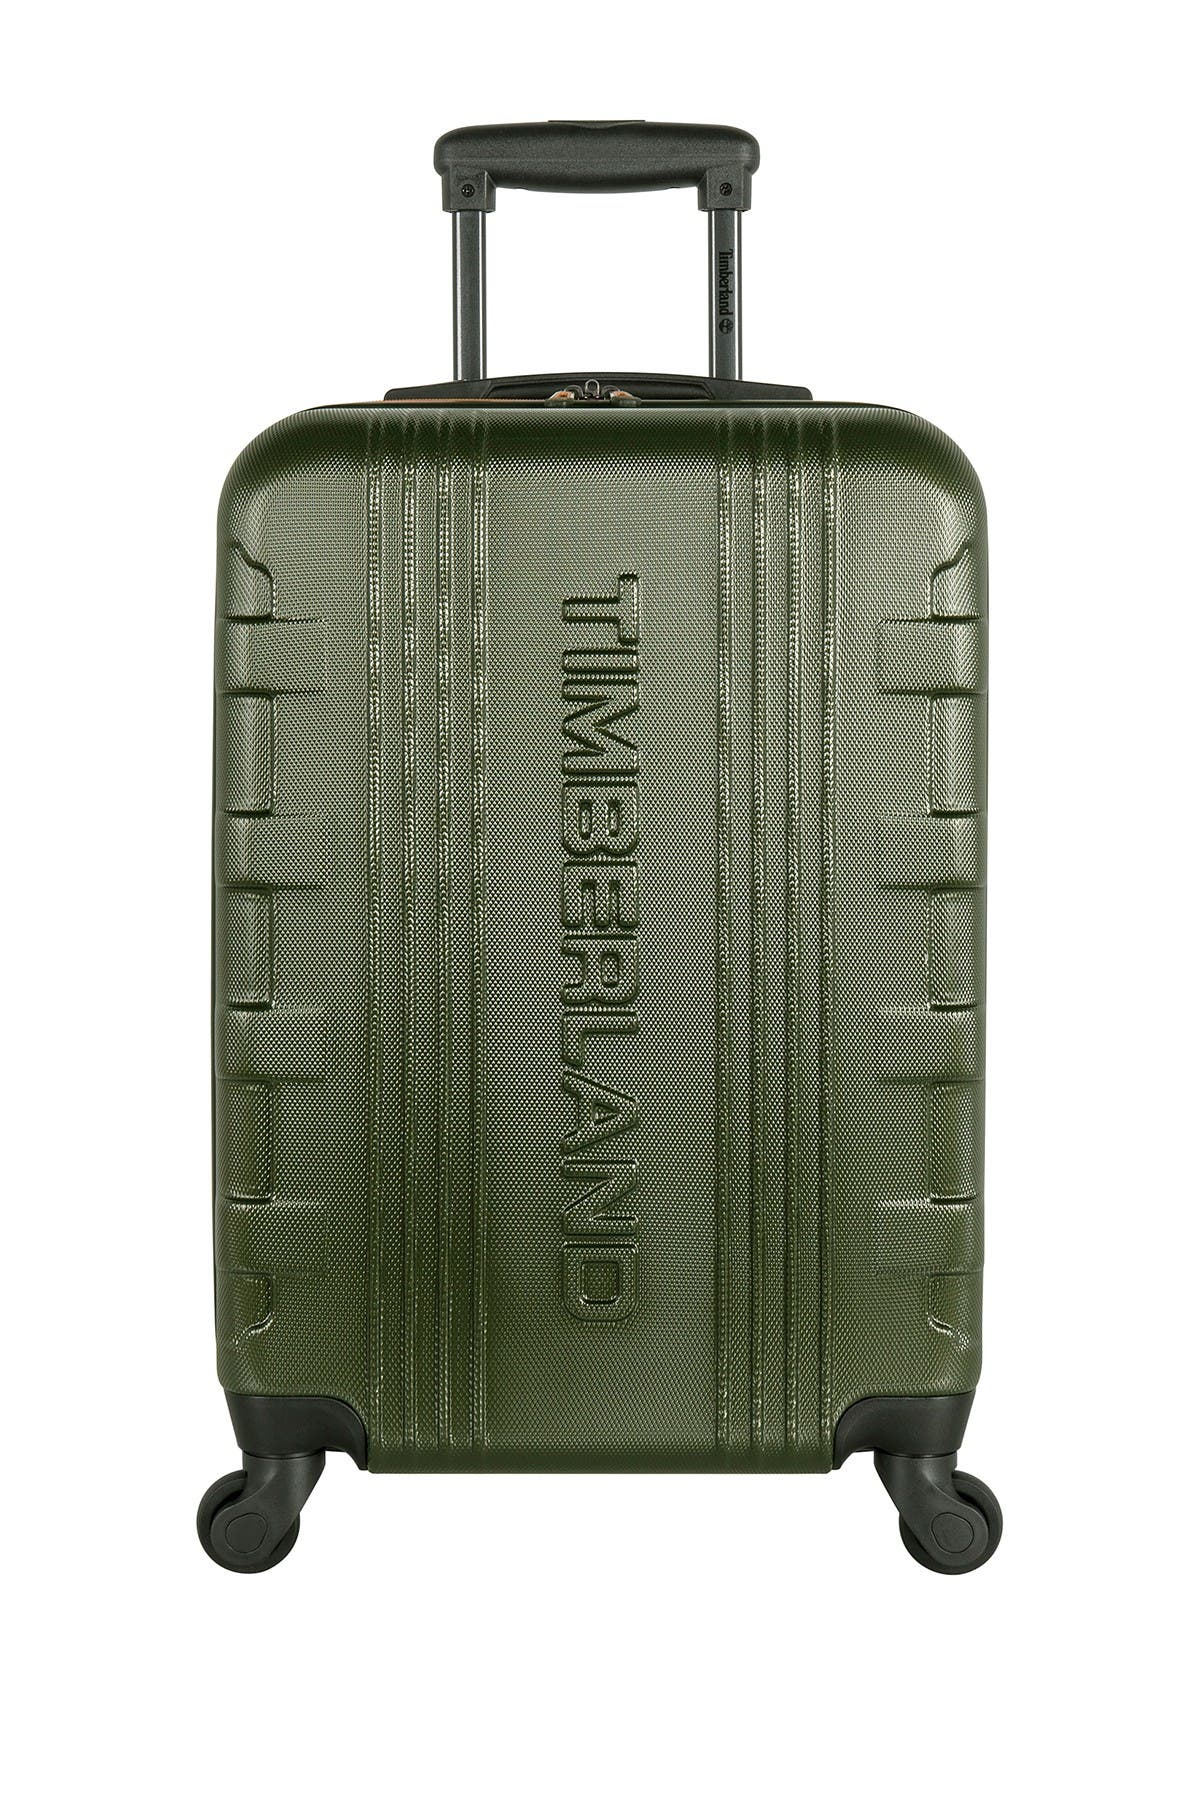 Timberland Carry-On Suitcases (18”-22 